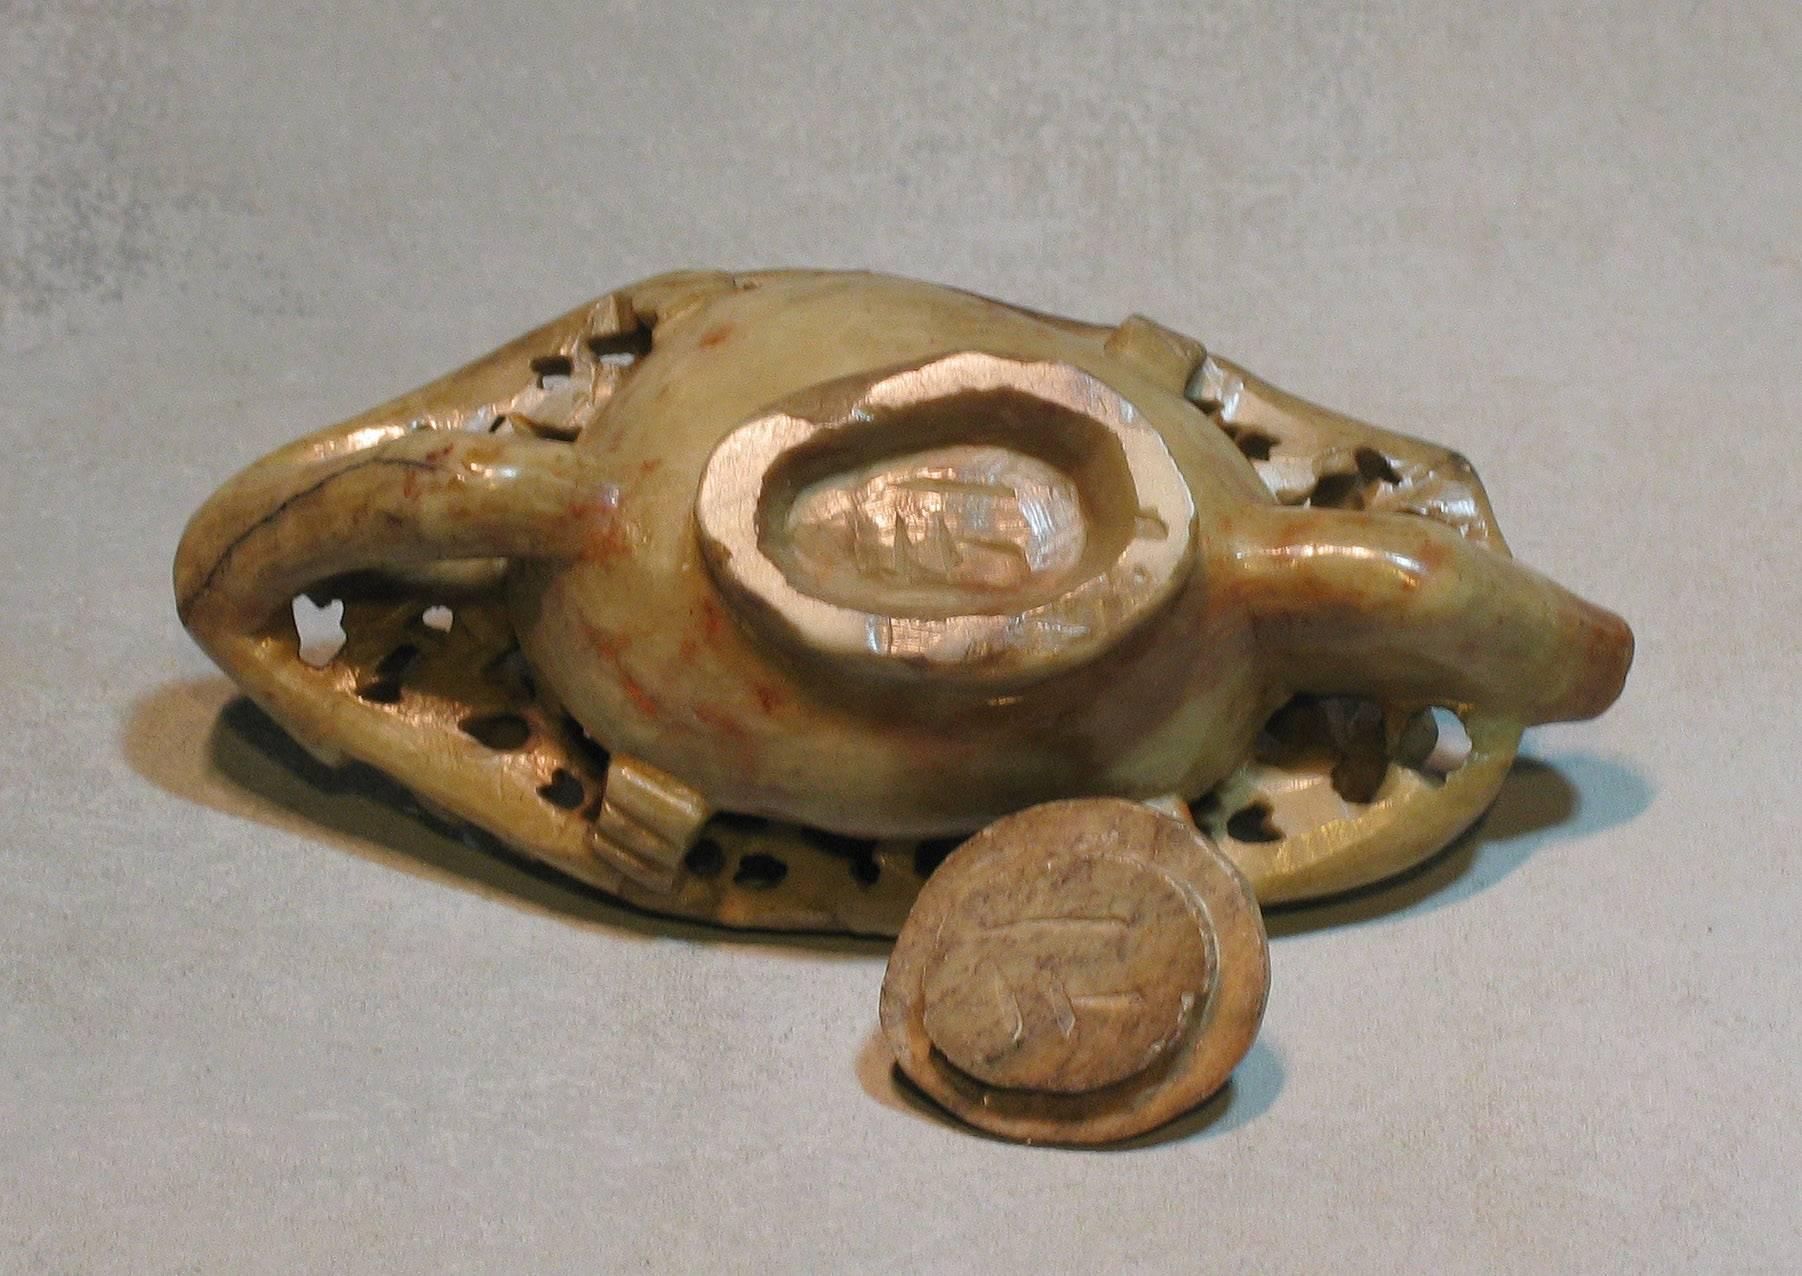 A carved Chinese soapstone water dropper, boat shaped receptacle with spout and handle, carved with trailing floral stems and a domed cover with a bird forming a finial. Late Qing/Republic period. The water dropper measures 6